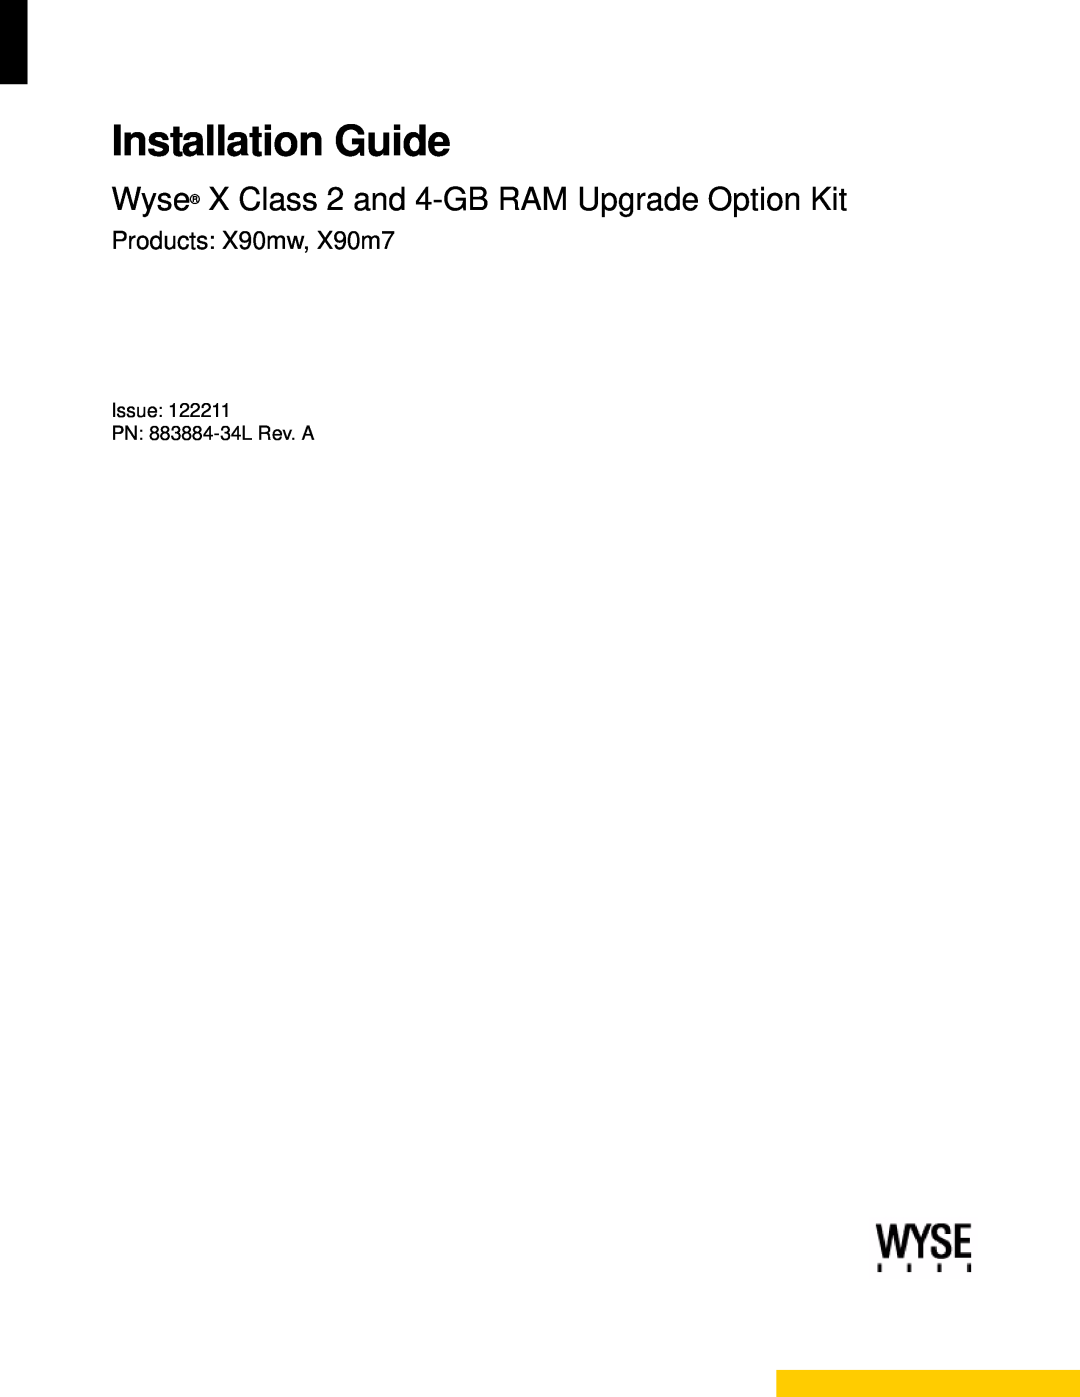 Wyse Technology wyse x class 2 and 4-gb ram upgrade option kit manual Installation Guide, Products X90mw, X90m7 